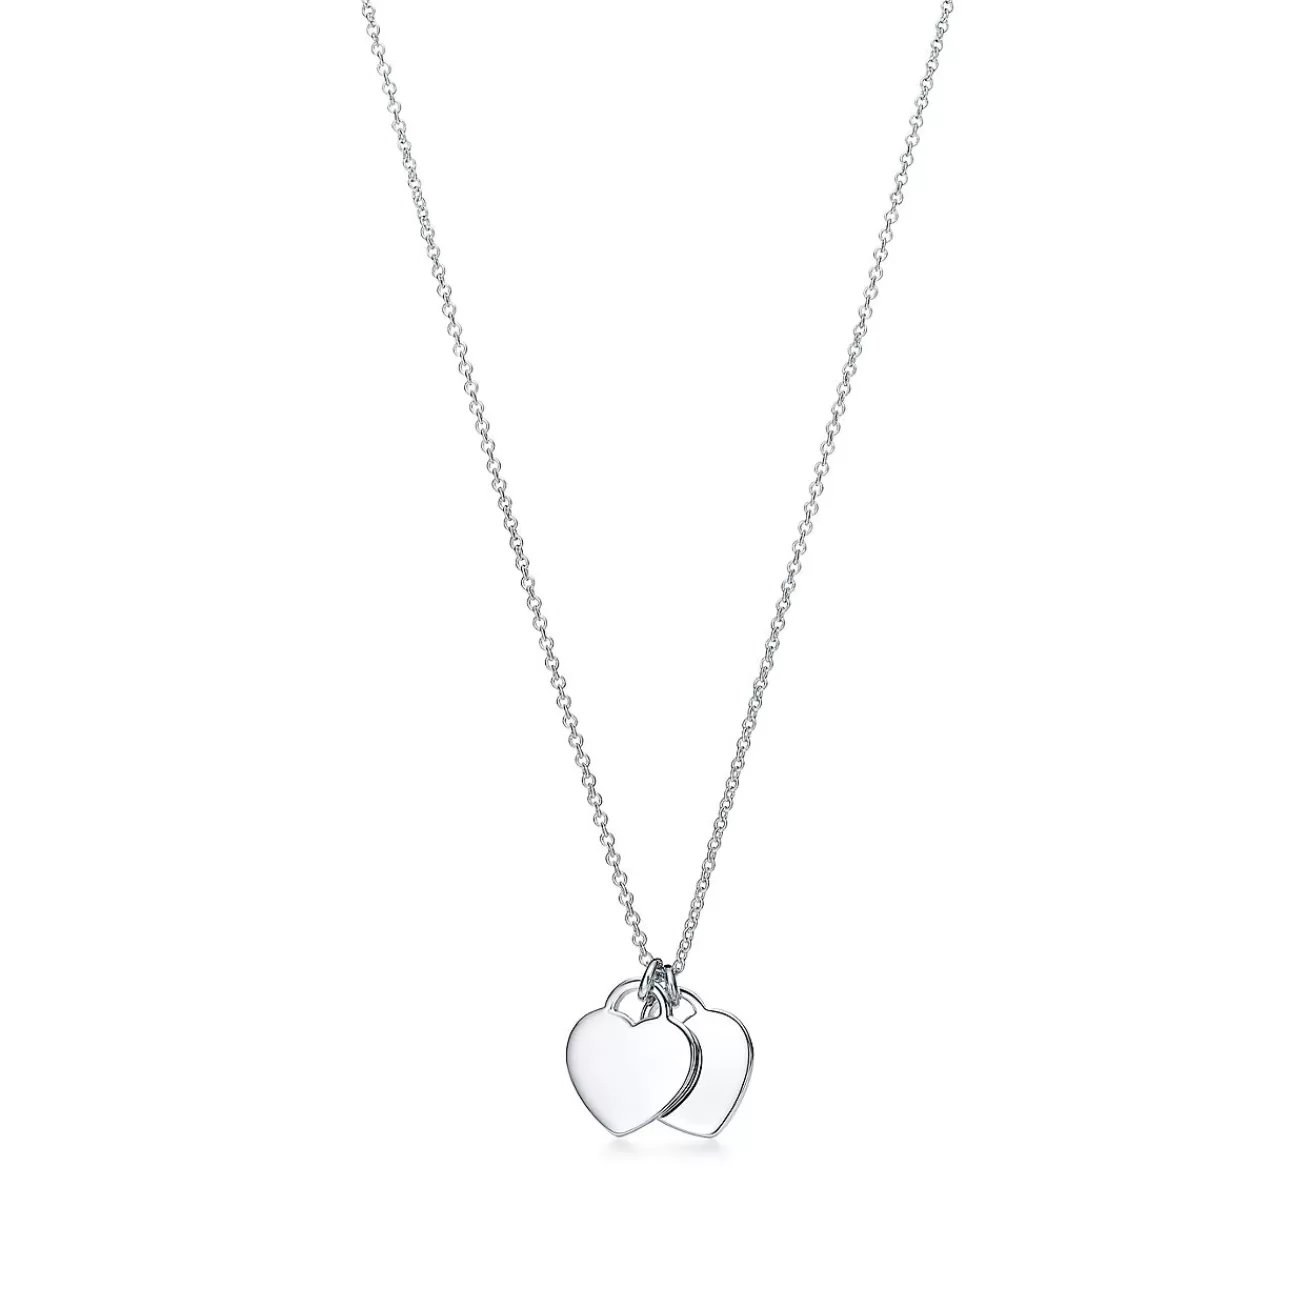 Tiffany & Co. Return to Tiffany® Double Heart Tag Pendant in Silver, Mini | ^ Necklaces & Pendants | Gifts for Her